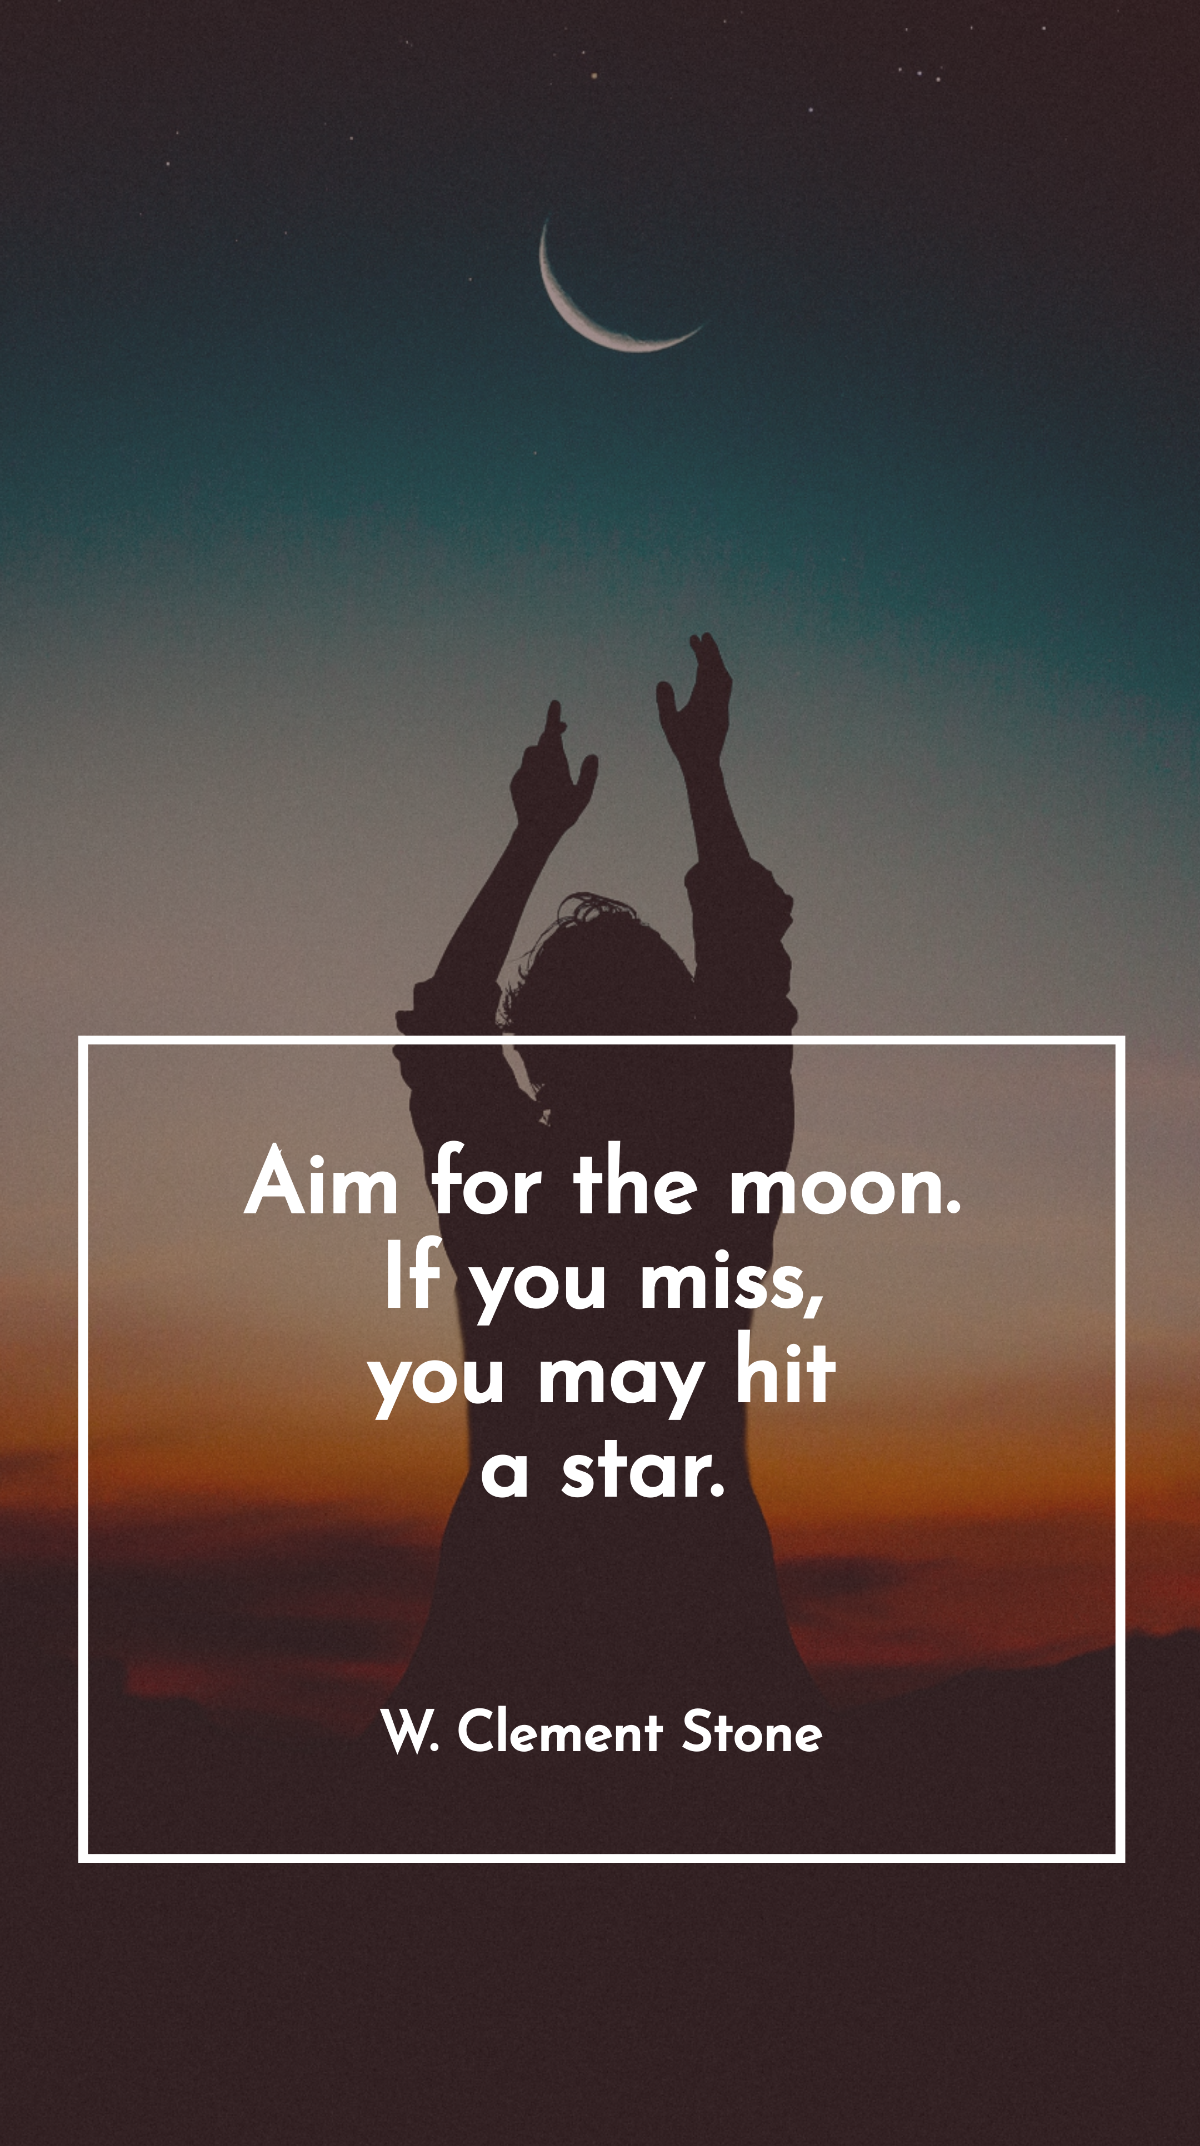 W. Clement Stone - Aim for the moon. If you miss, you may hit a star. Template